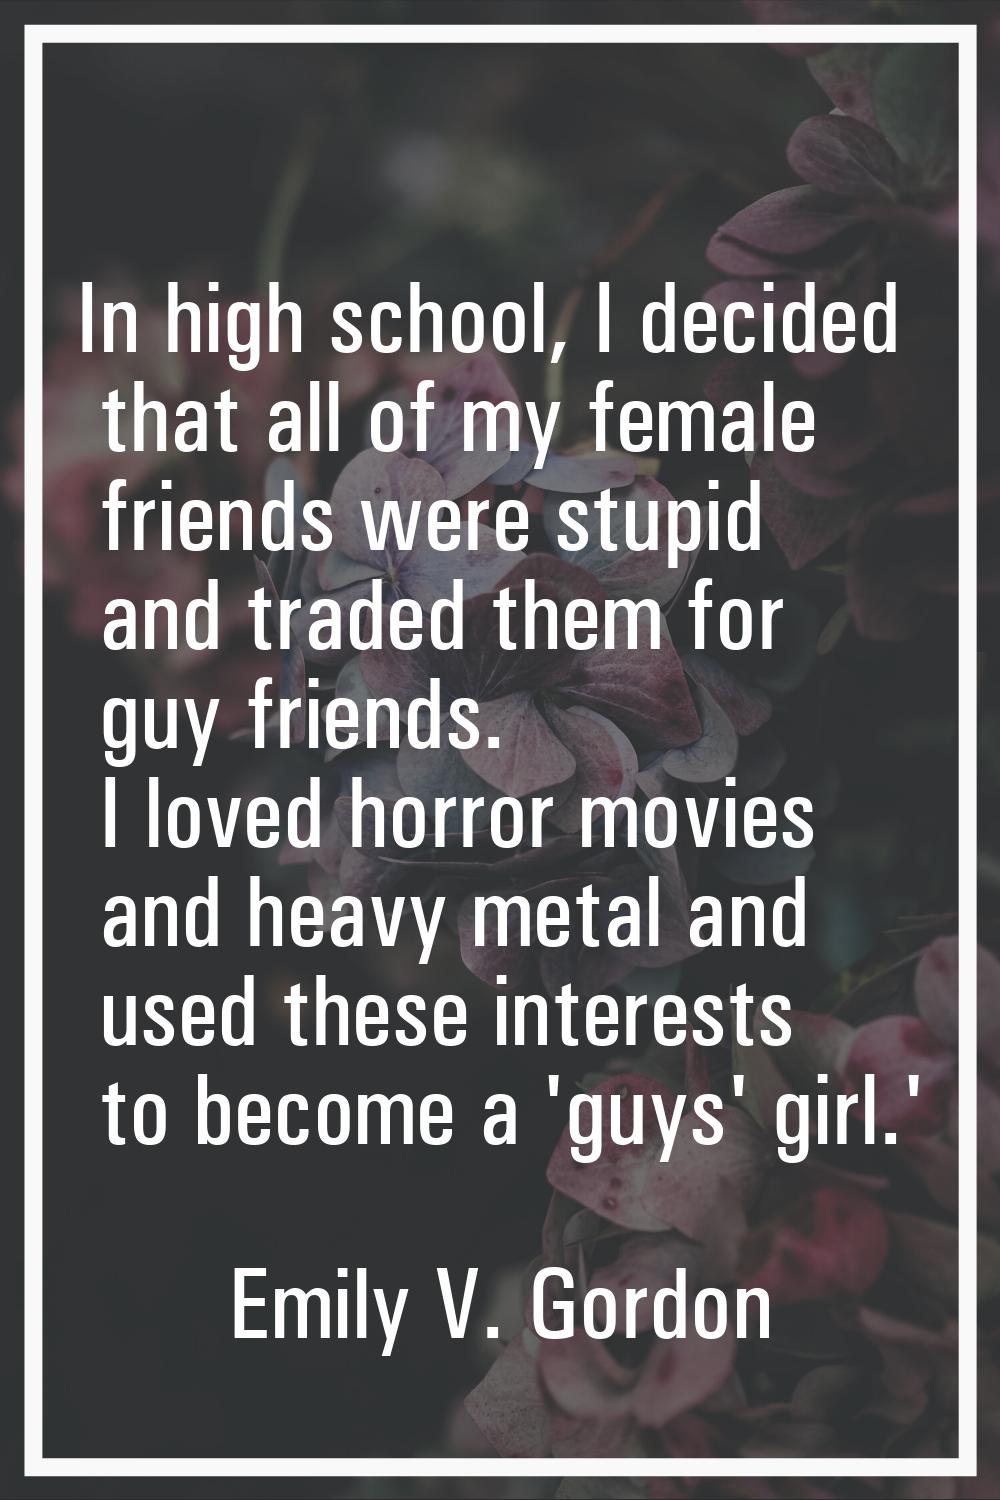 In high school, I decided that all of my female friends were stupid and traded them for guy friends